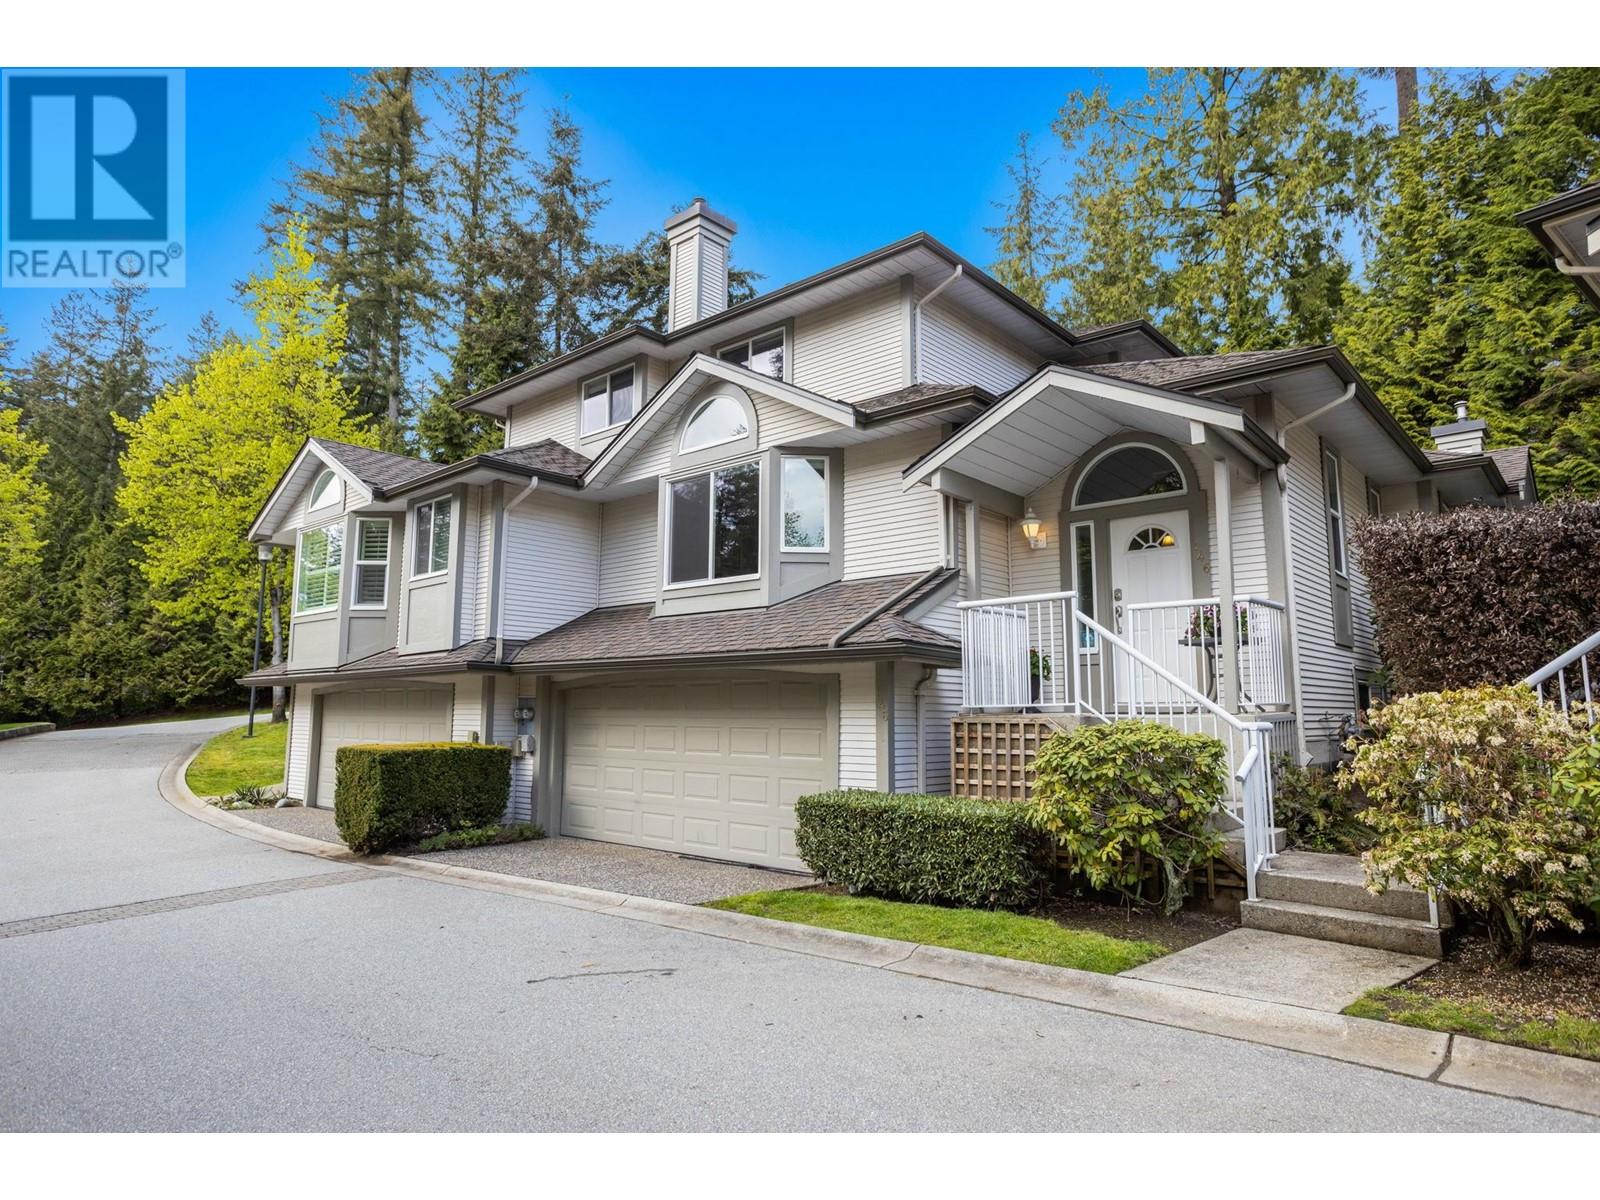 146 101 Parkside Drive, Port Moody, British Columbia  V3H 4W6 - Photo 1 - R2876169